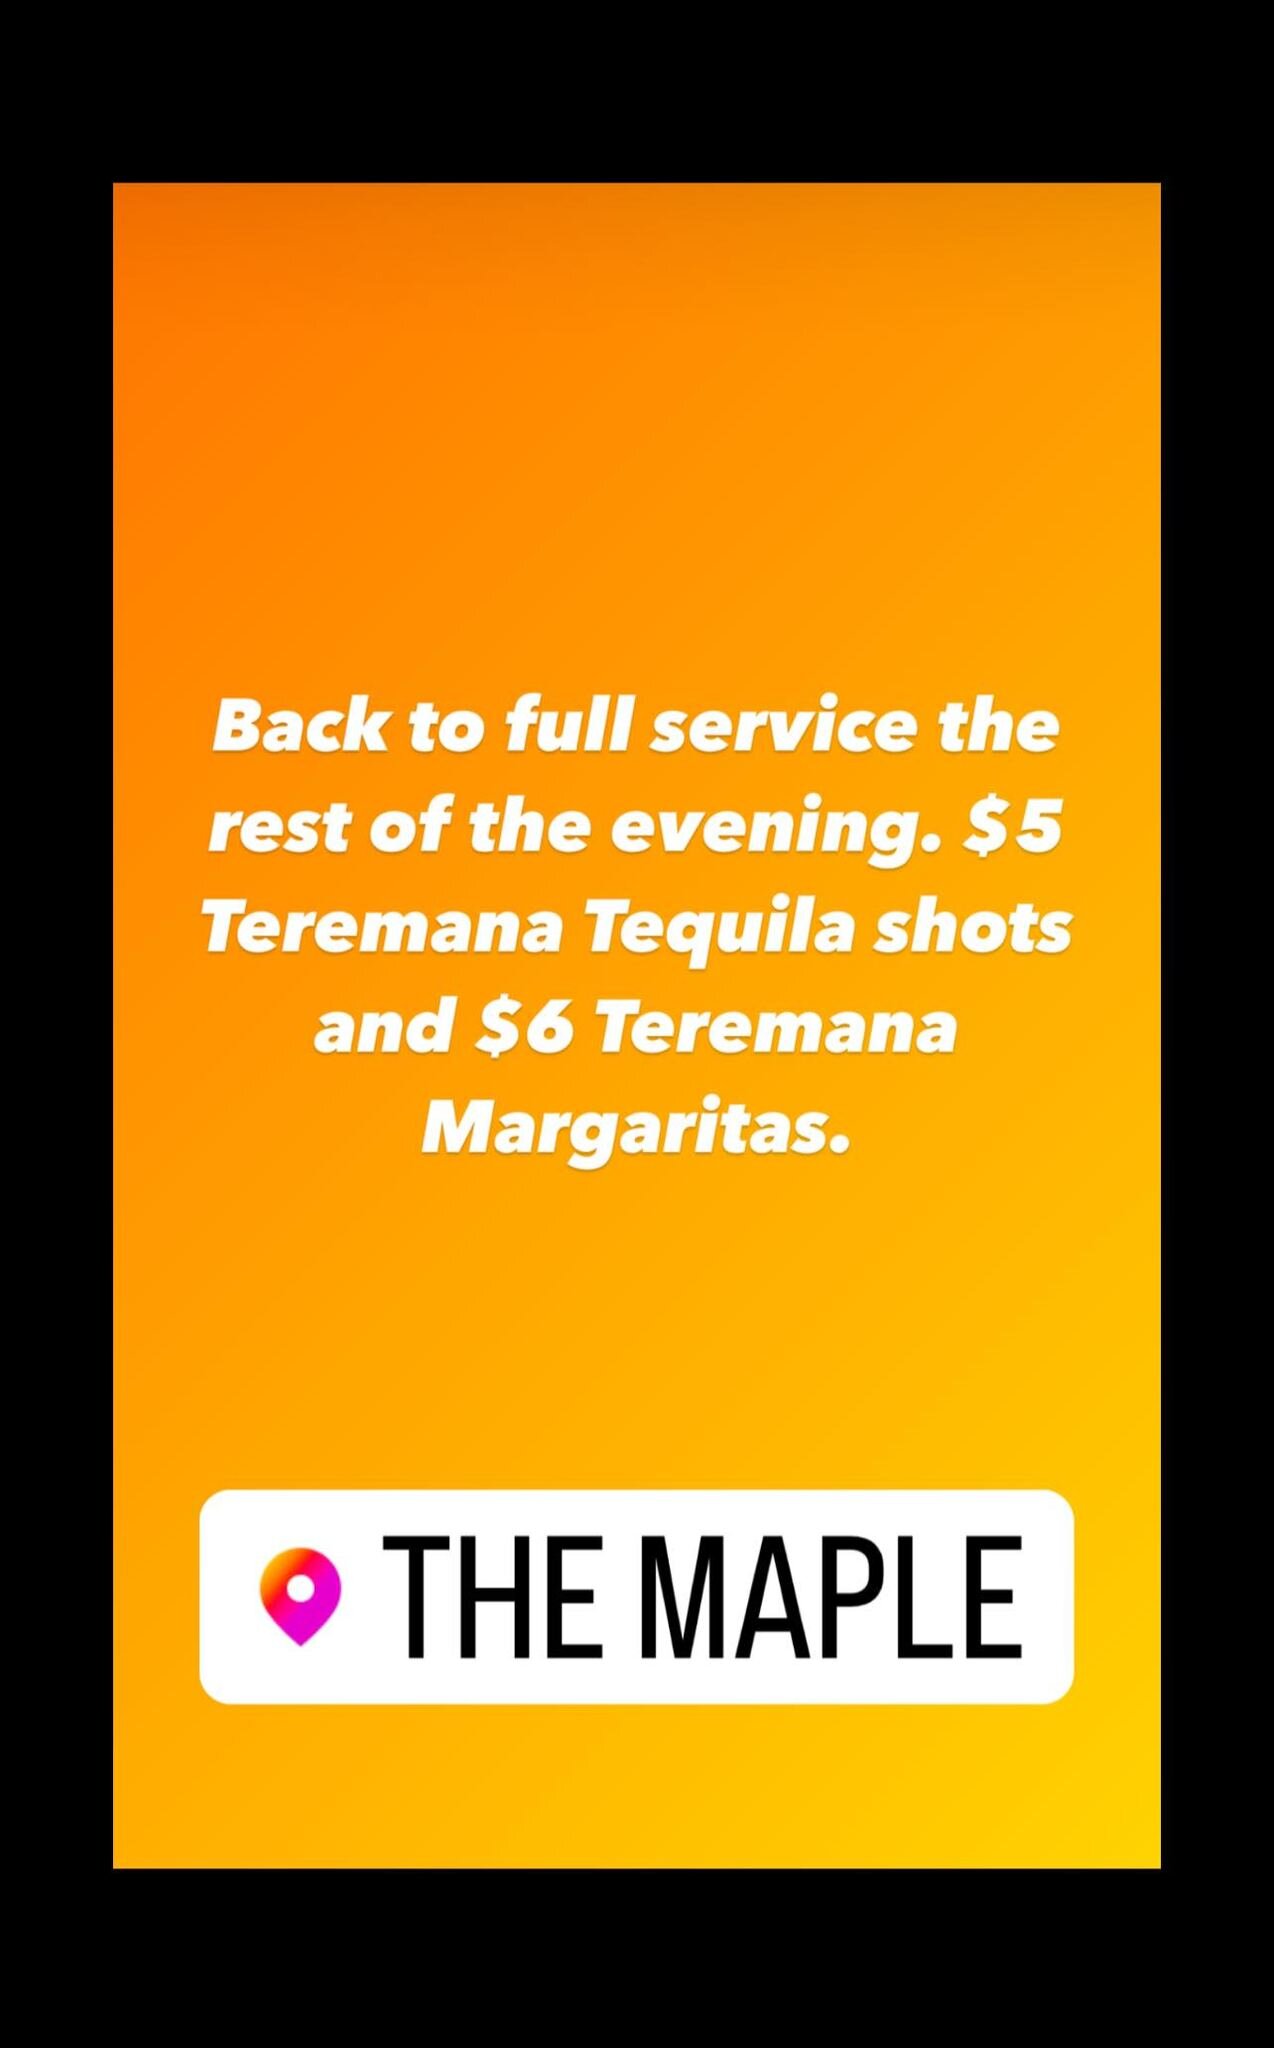 Let the snow fall, Waukegan! The only thing warmer than this cozy cabin vibe at The Maple WKGN is our smoldering tequila takeover!

 All night long, we're pouring smokin' $5 Teremana Tequila shots and tangy $6 Teremana Margaritas to chase away those 